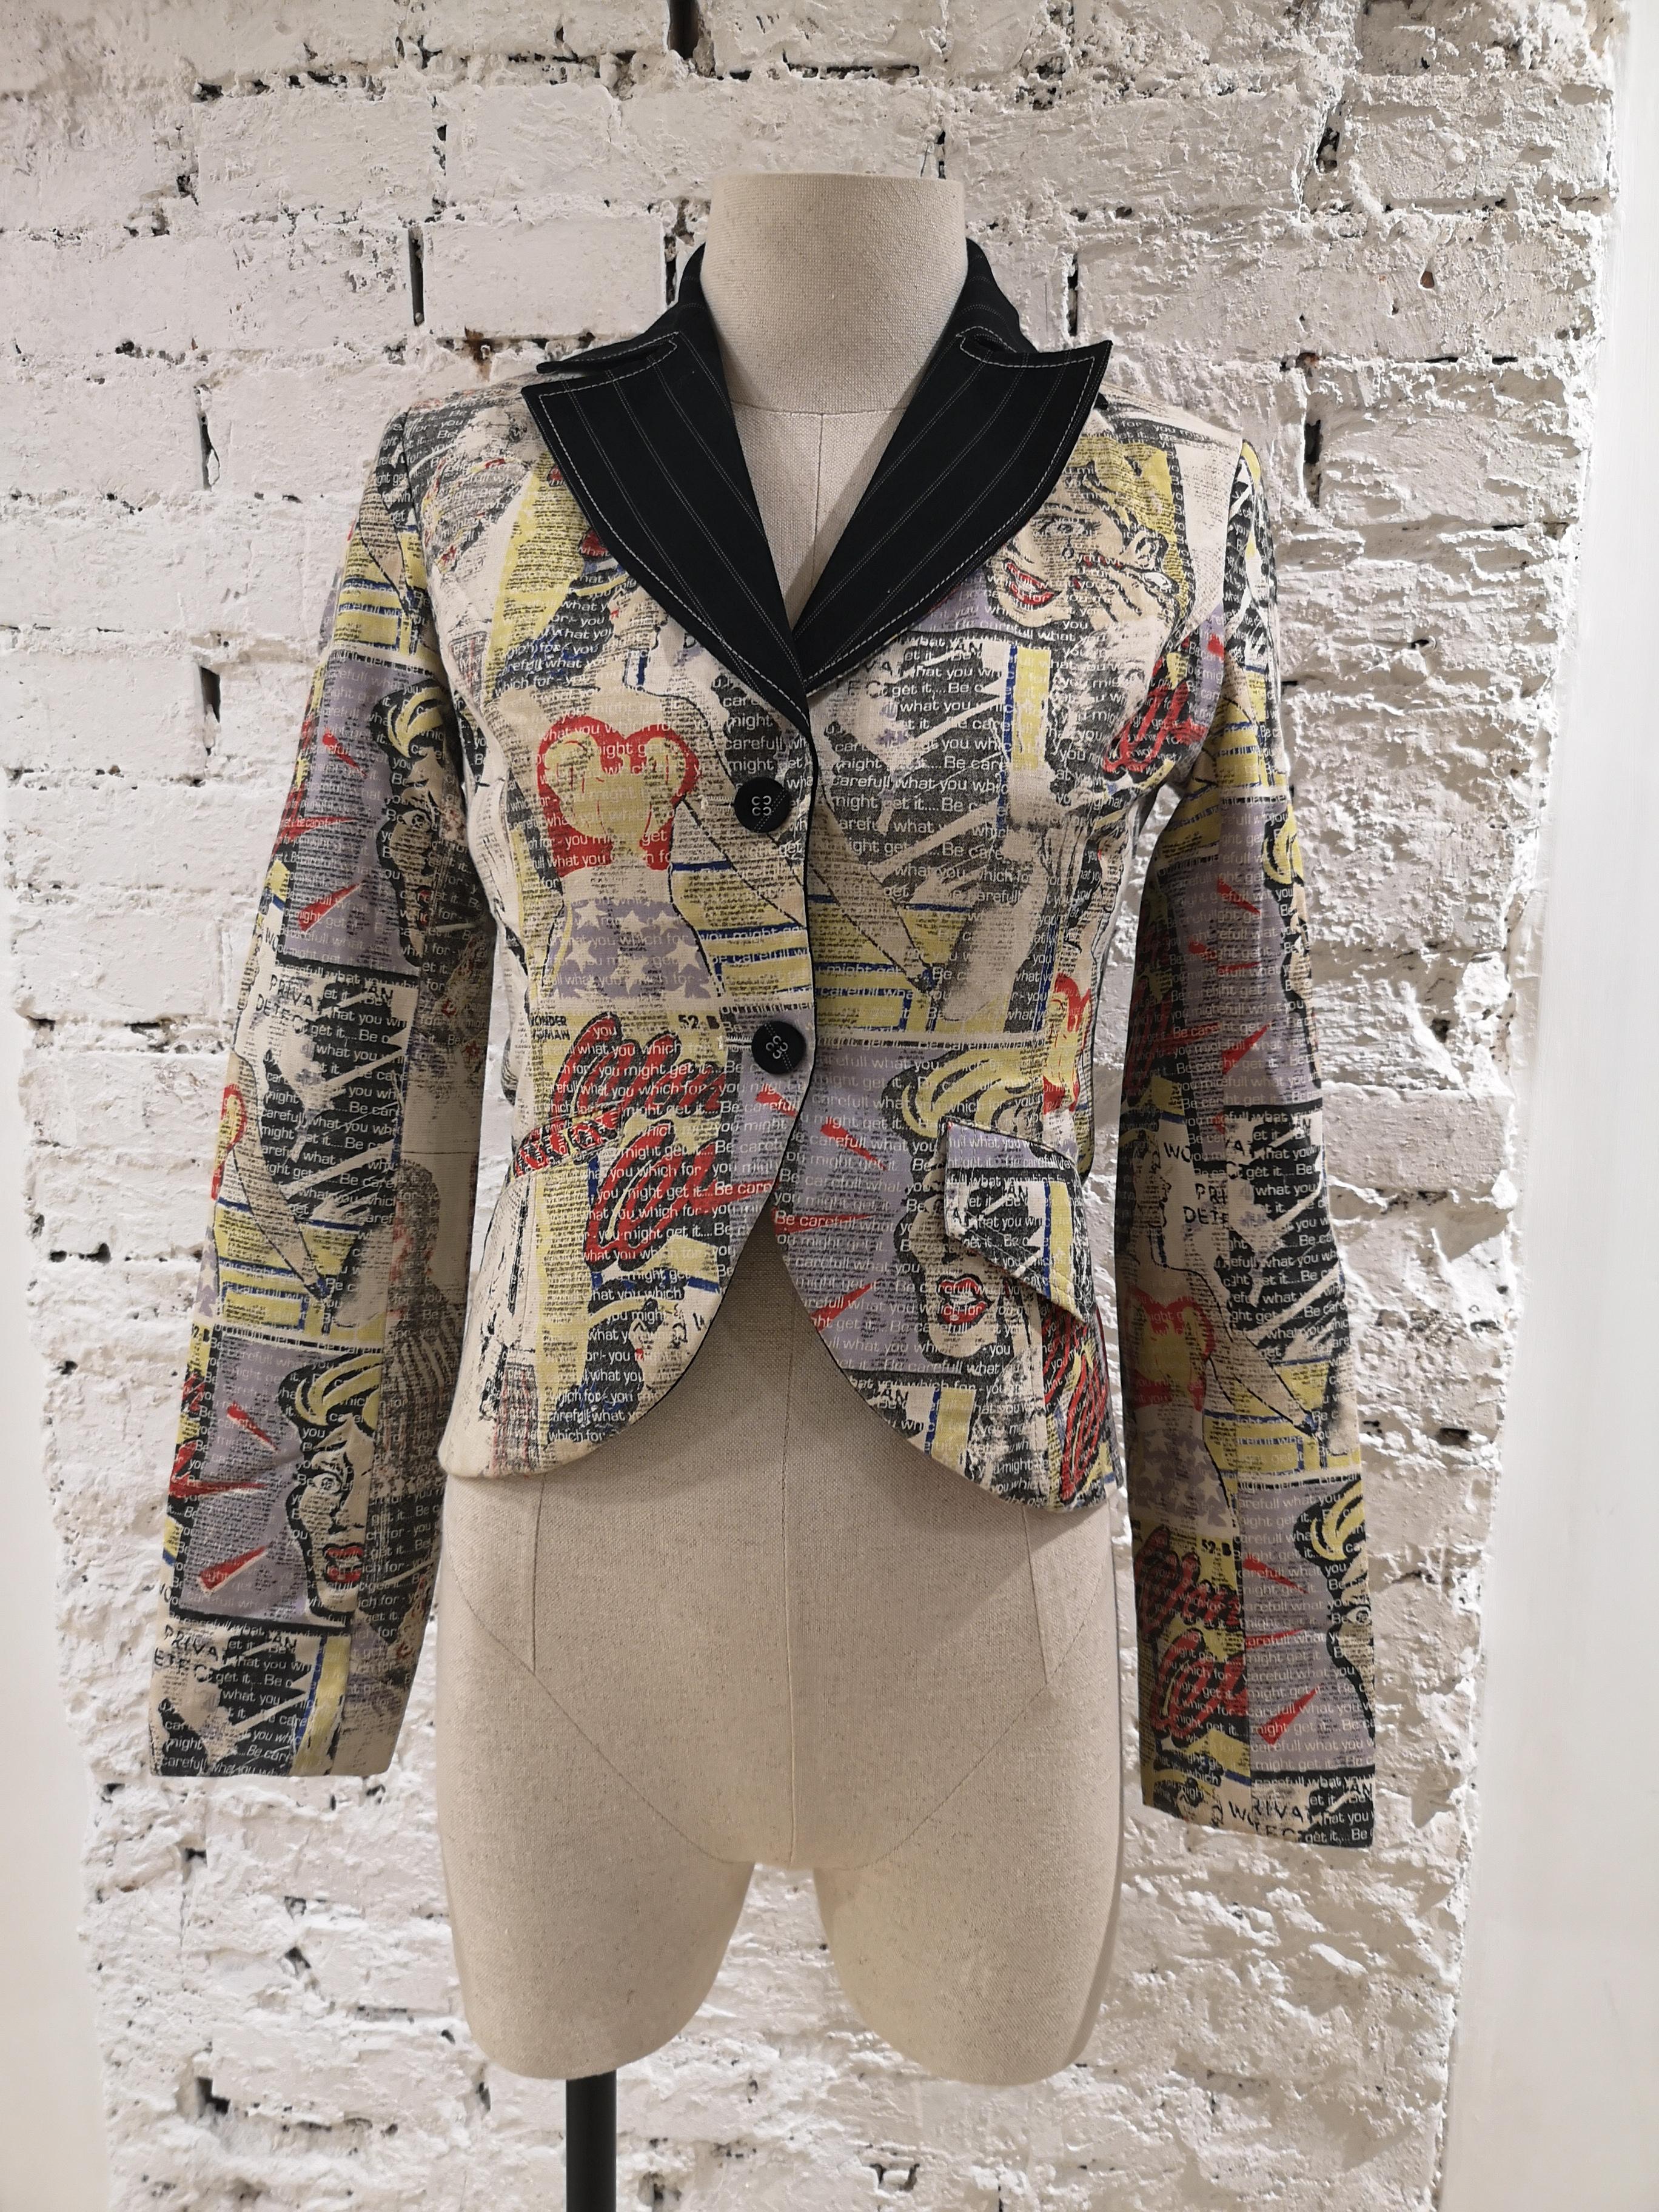 St. Martin comic cotton jacket
totally made of cotton
size 40